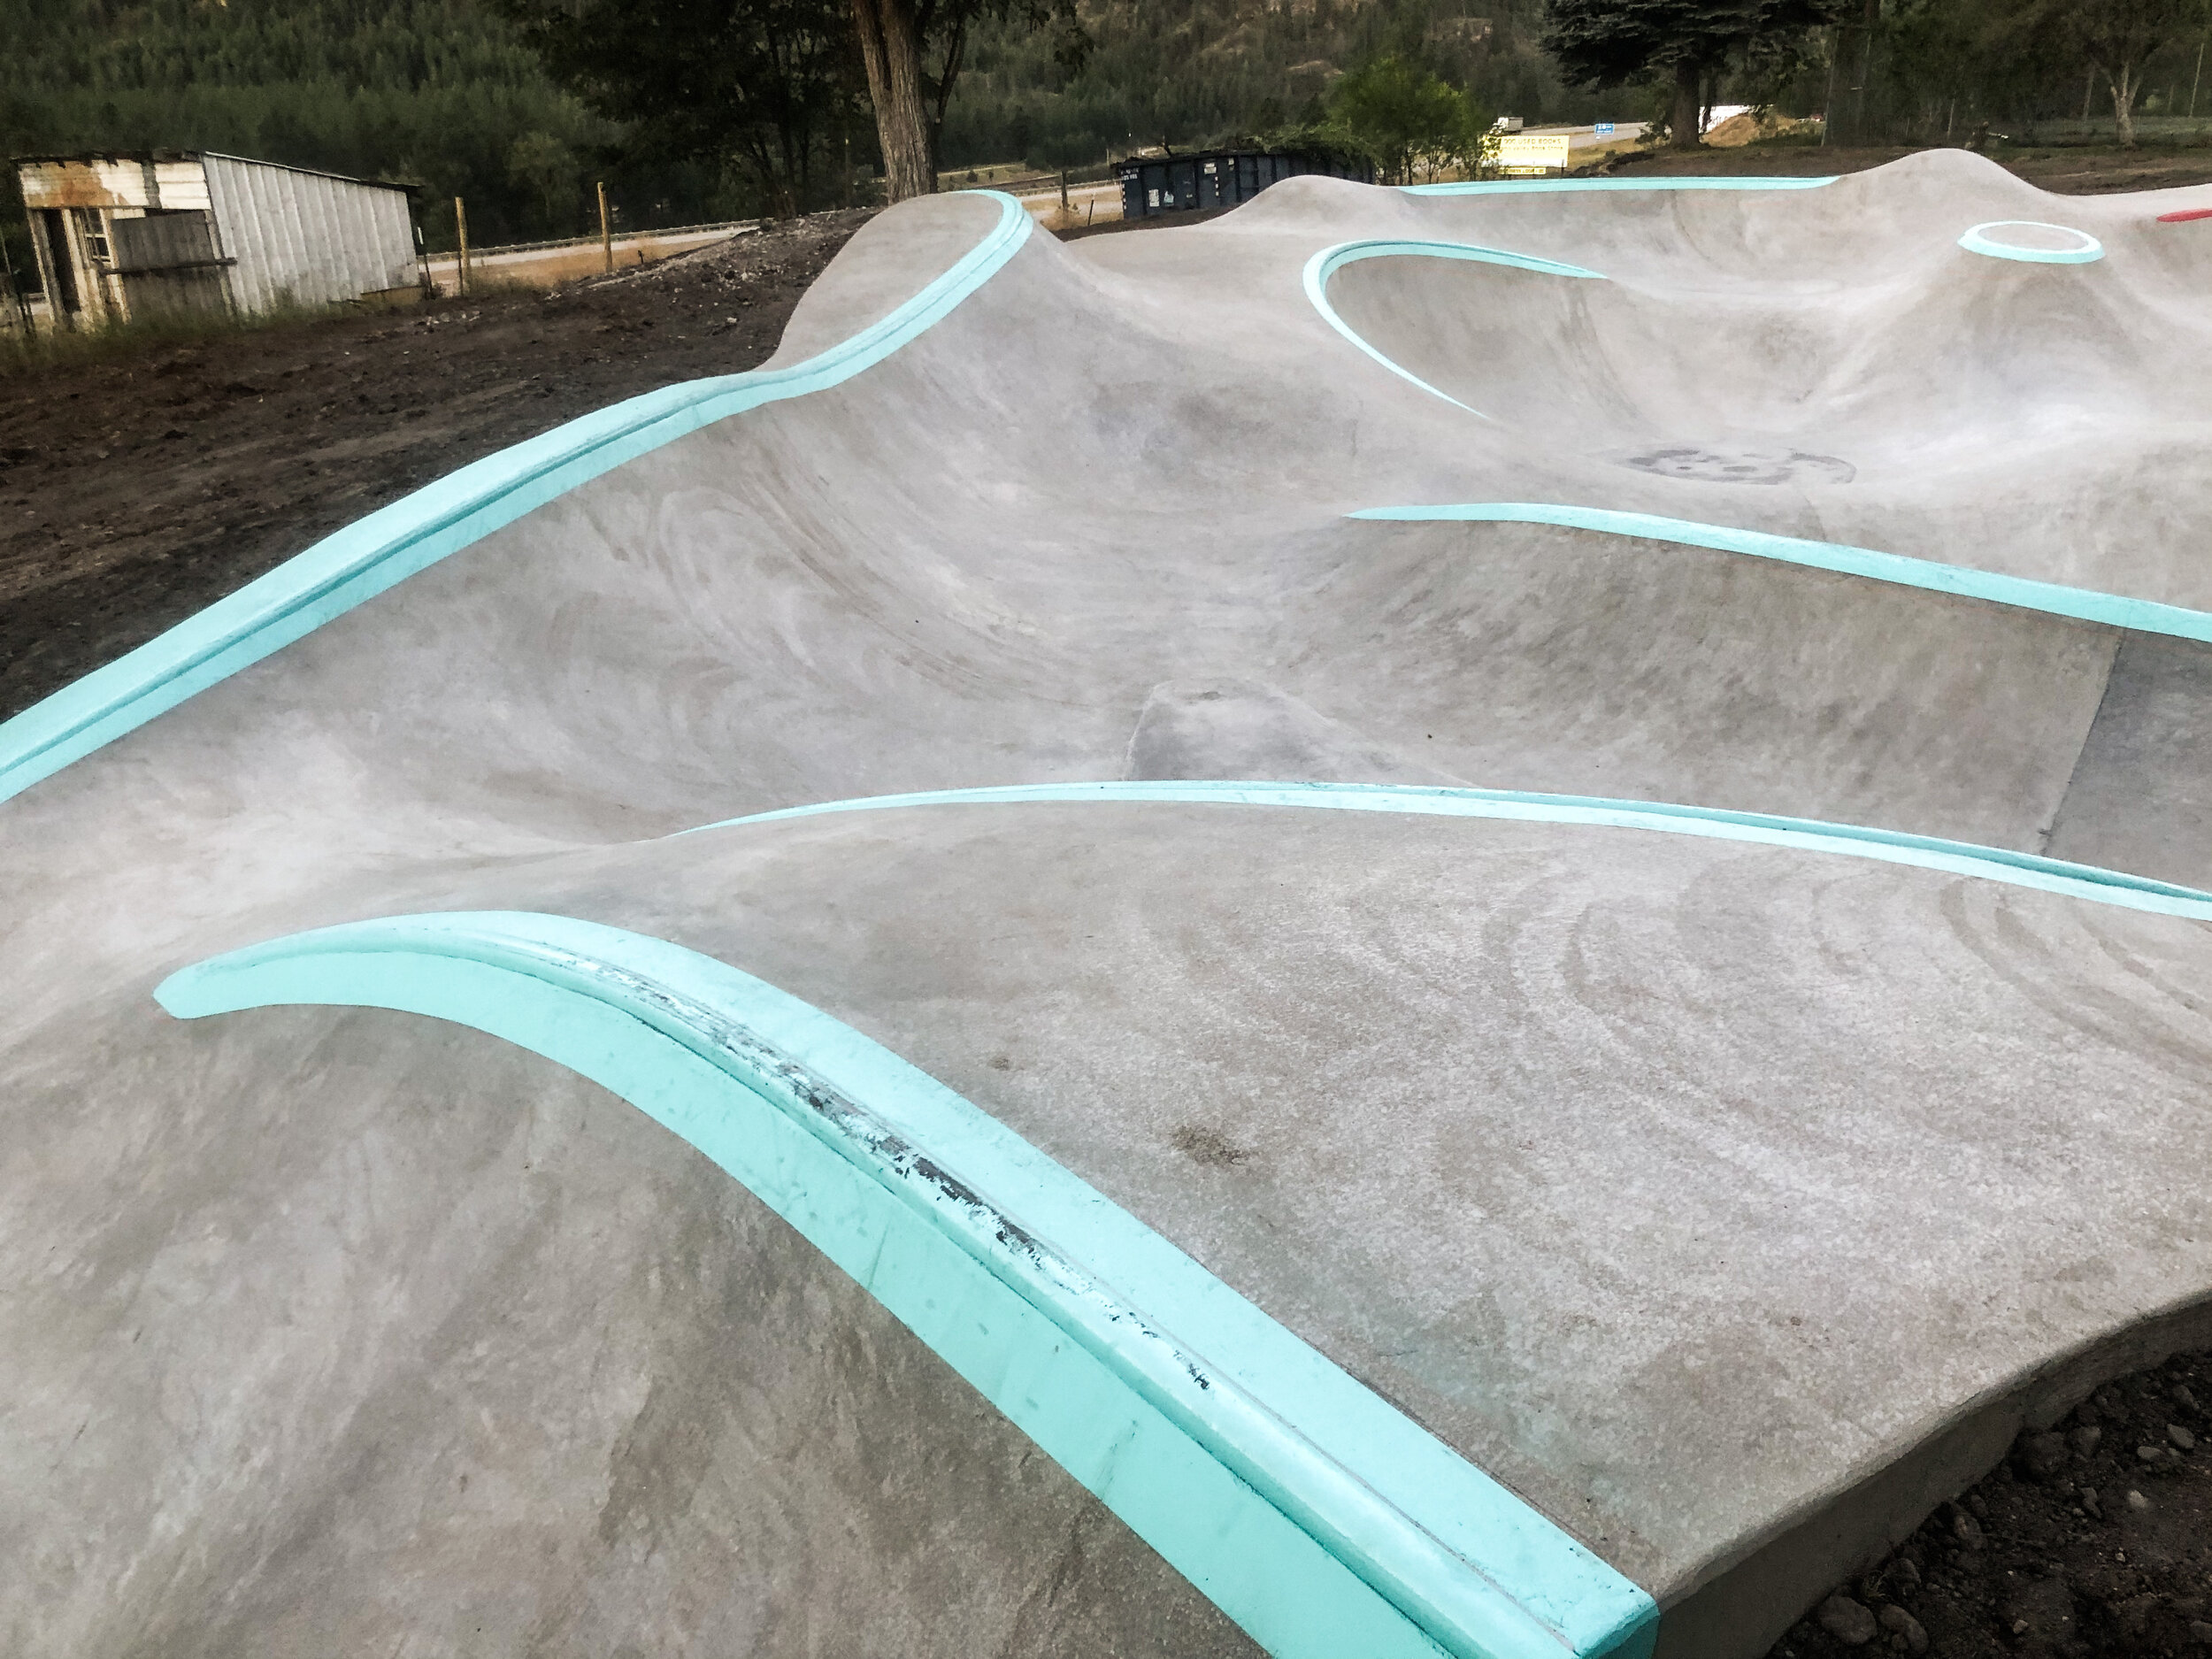 Alberton, Montana ✨ custom shapes &amp; blends of the correct proportion &amp; placement make #skateboarding really fun 😎